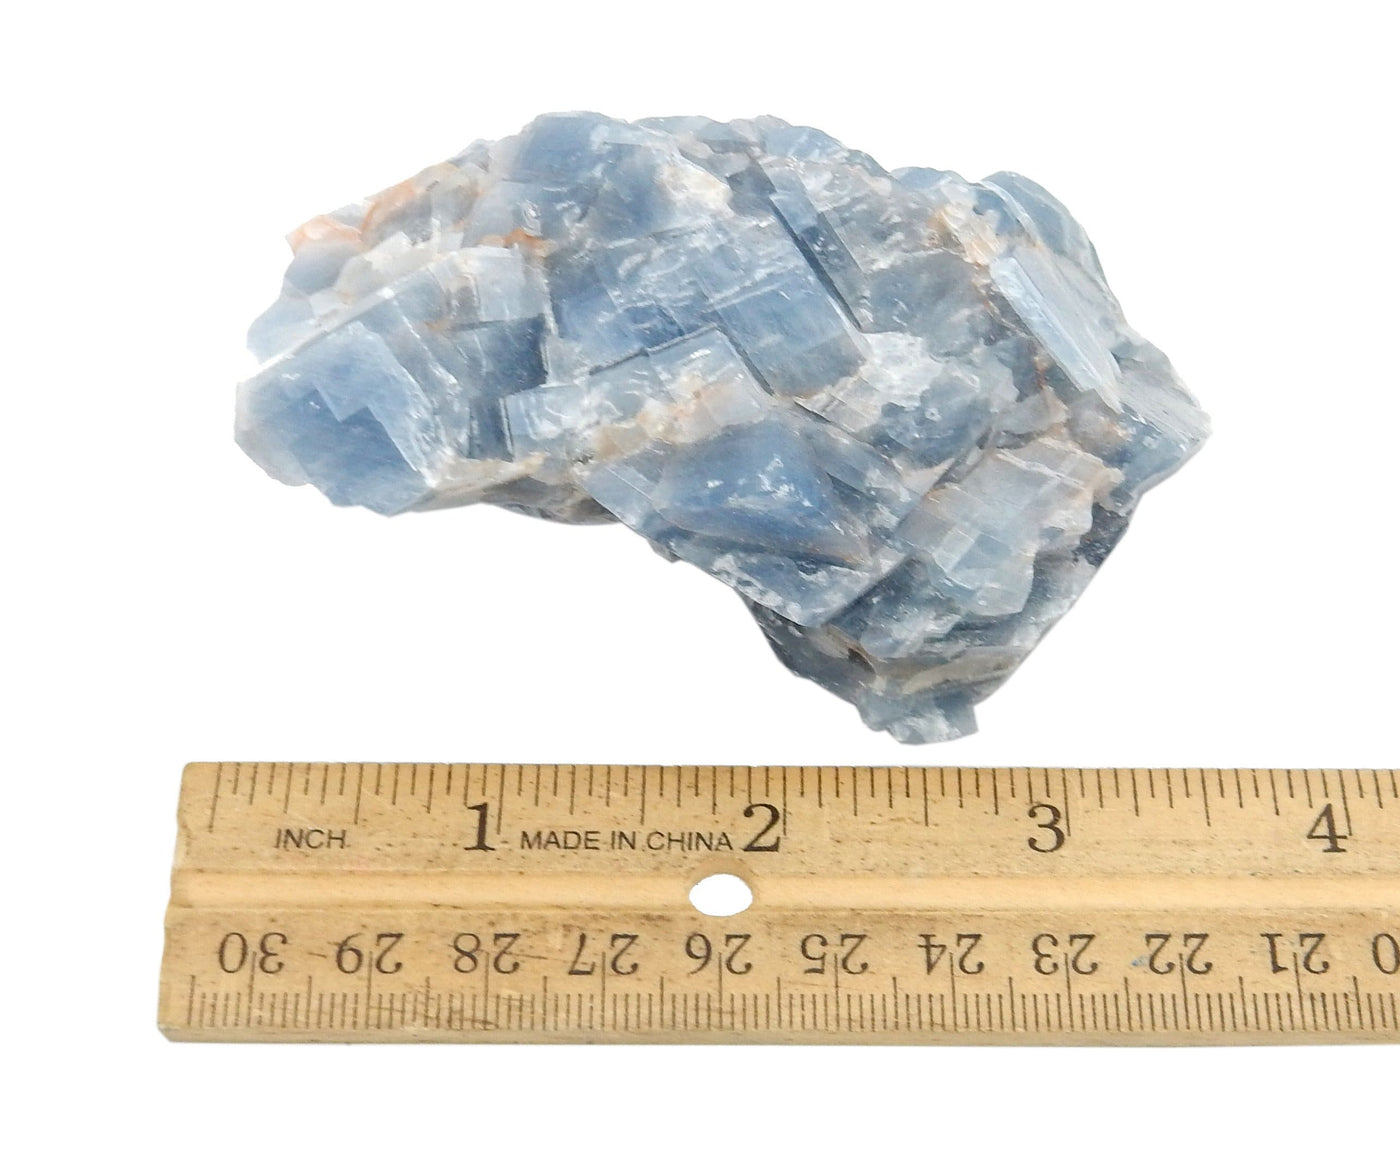 blue calcite stone next to ruler for size comparison